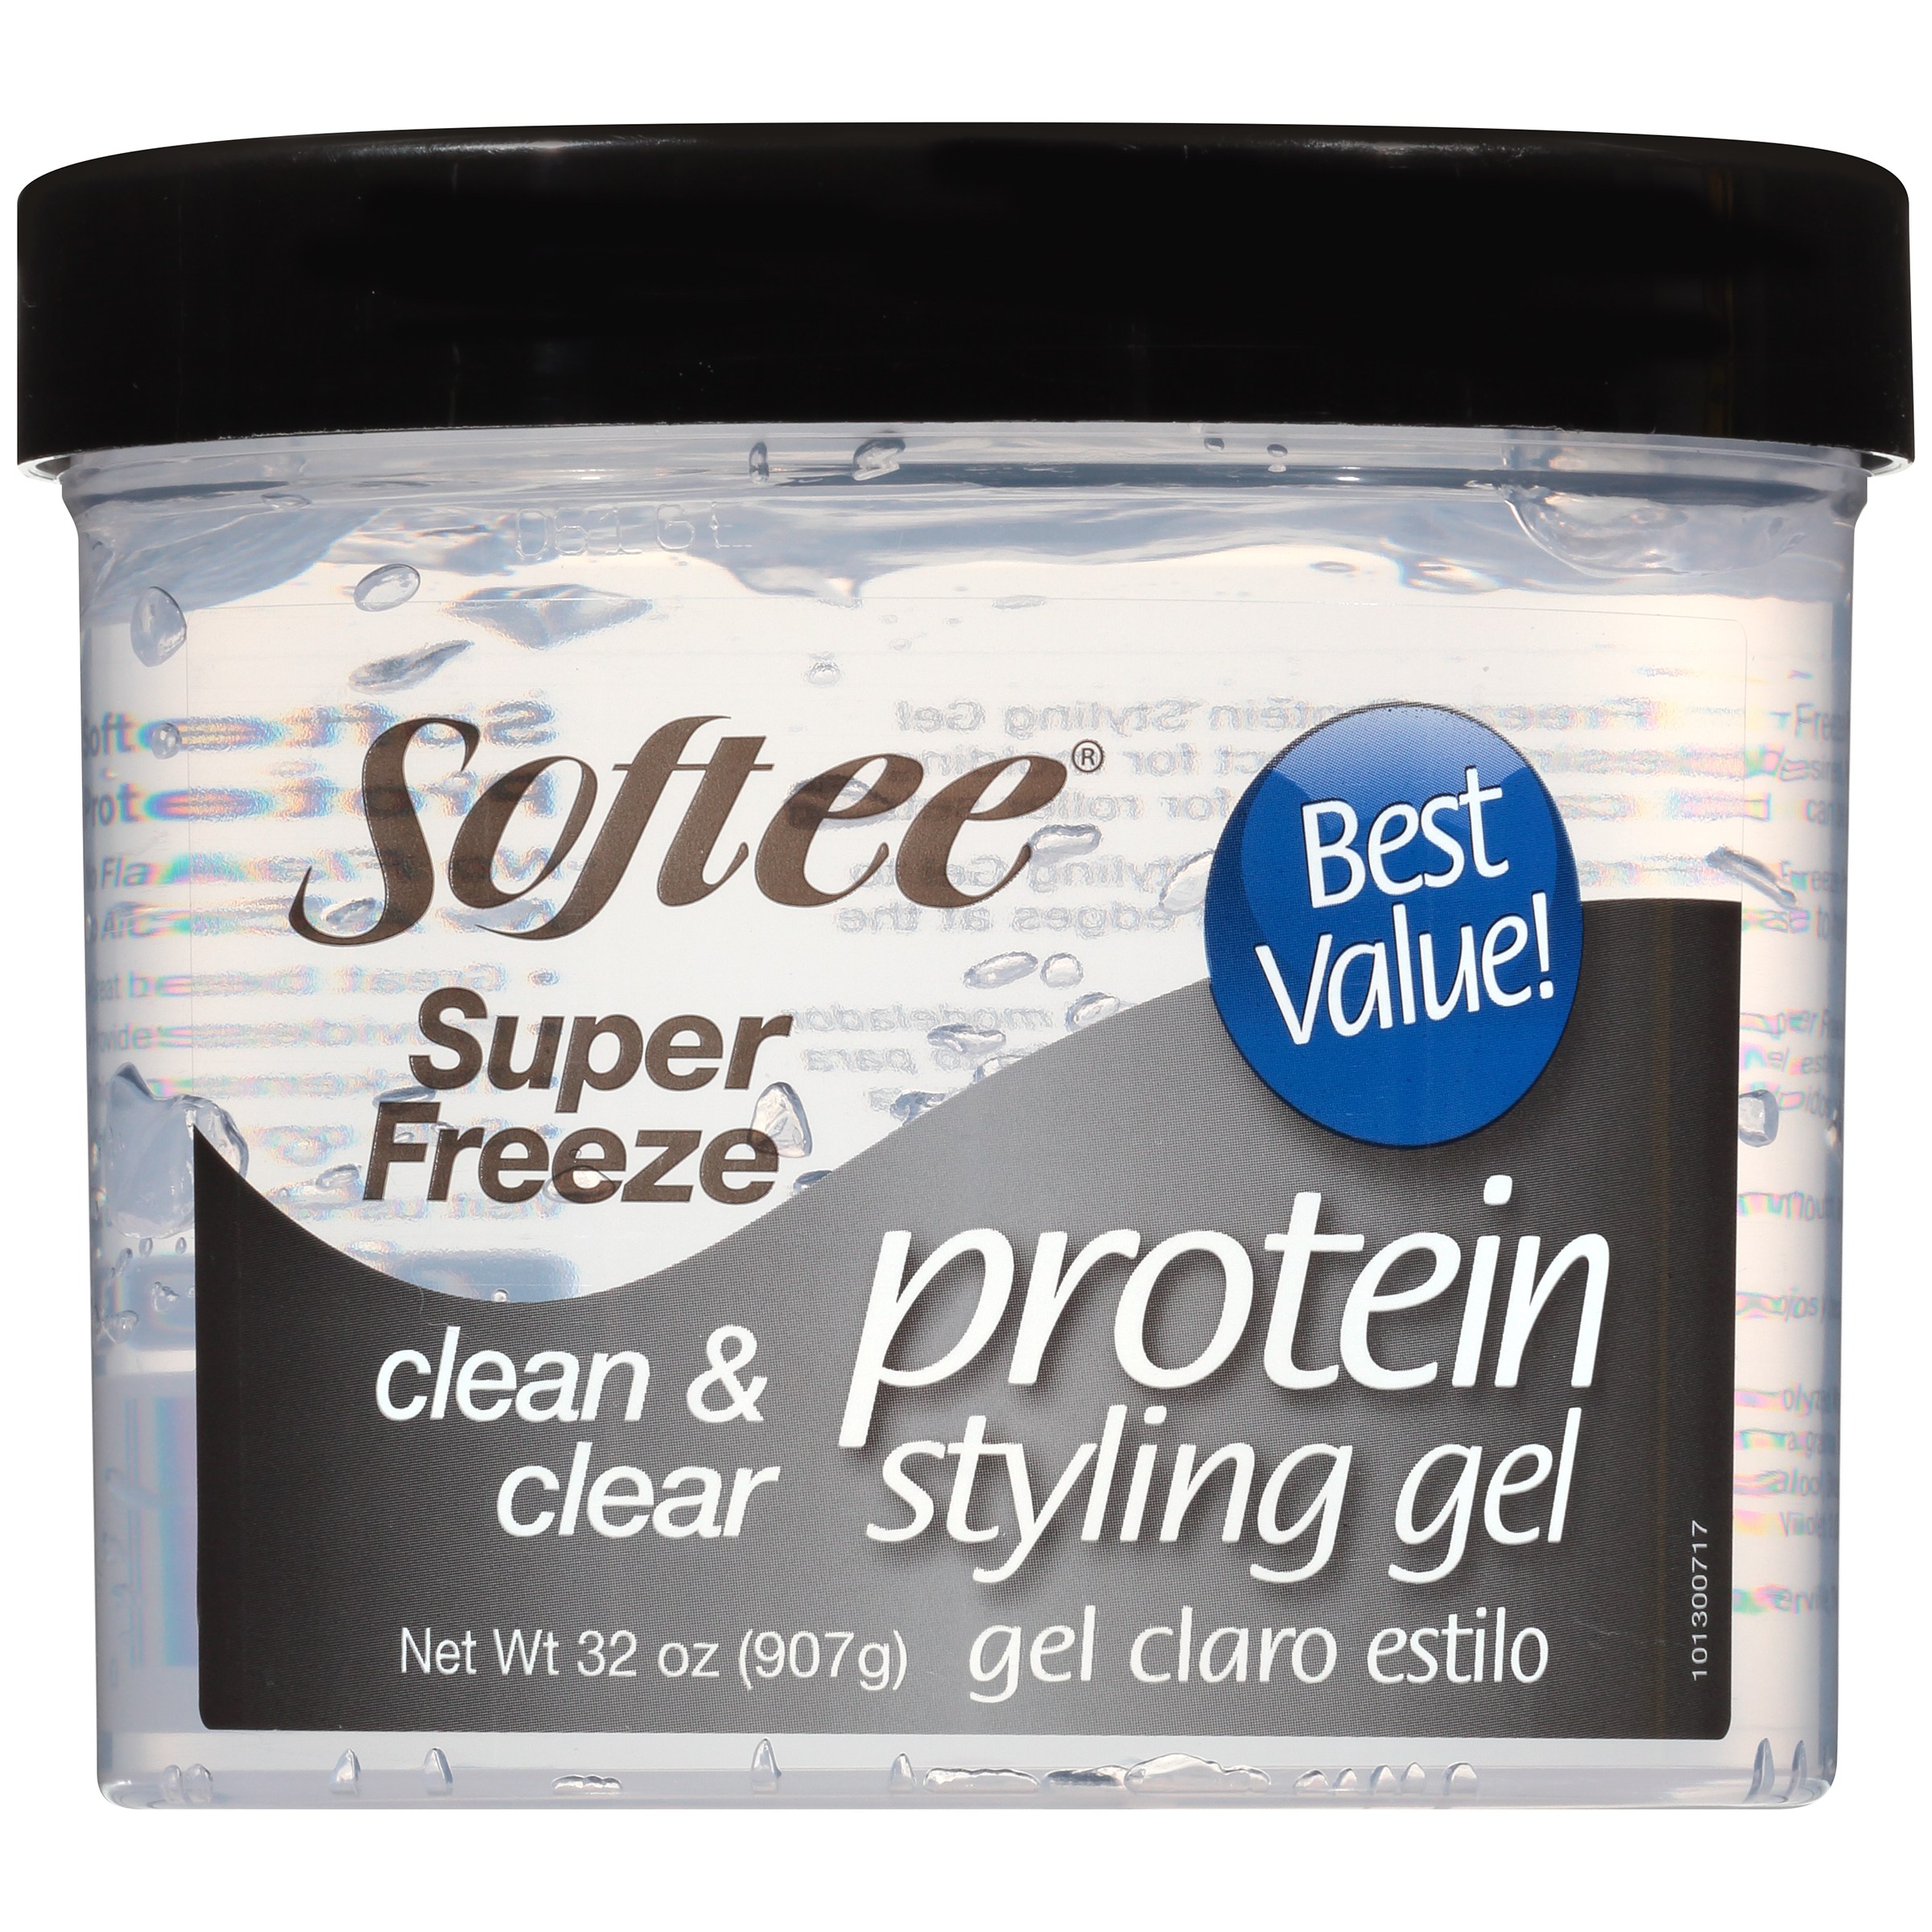 Softee Super Freeze Protein Styling Gel 32 oz. Jar, No Flake, Strengthens Hair,  Unisex - image 1 of 6